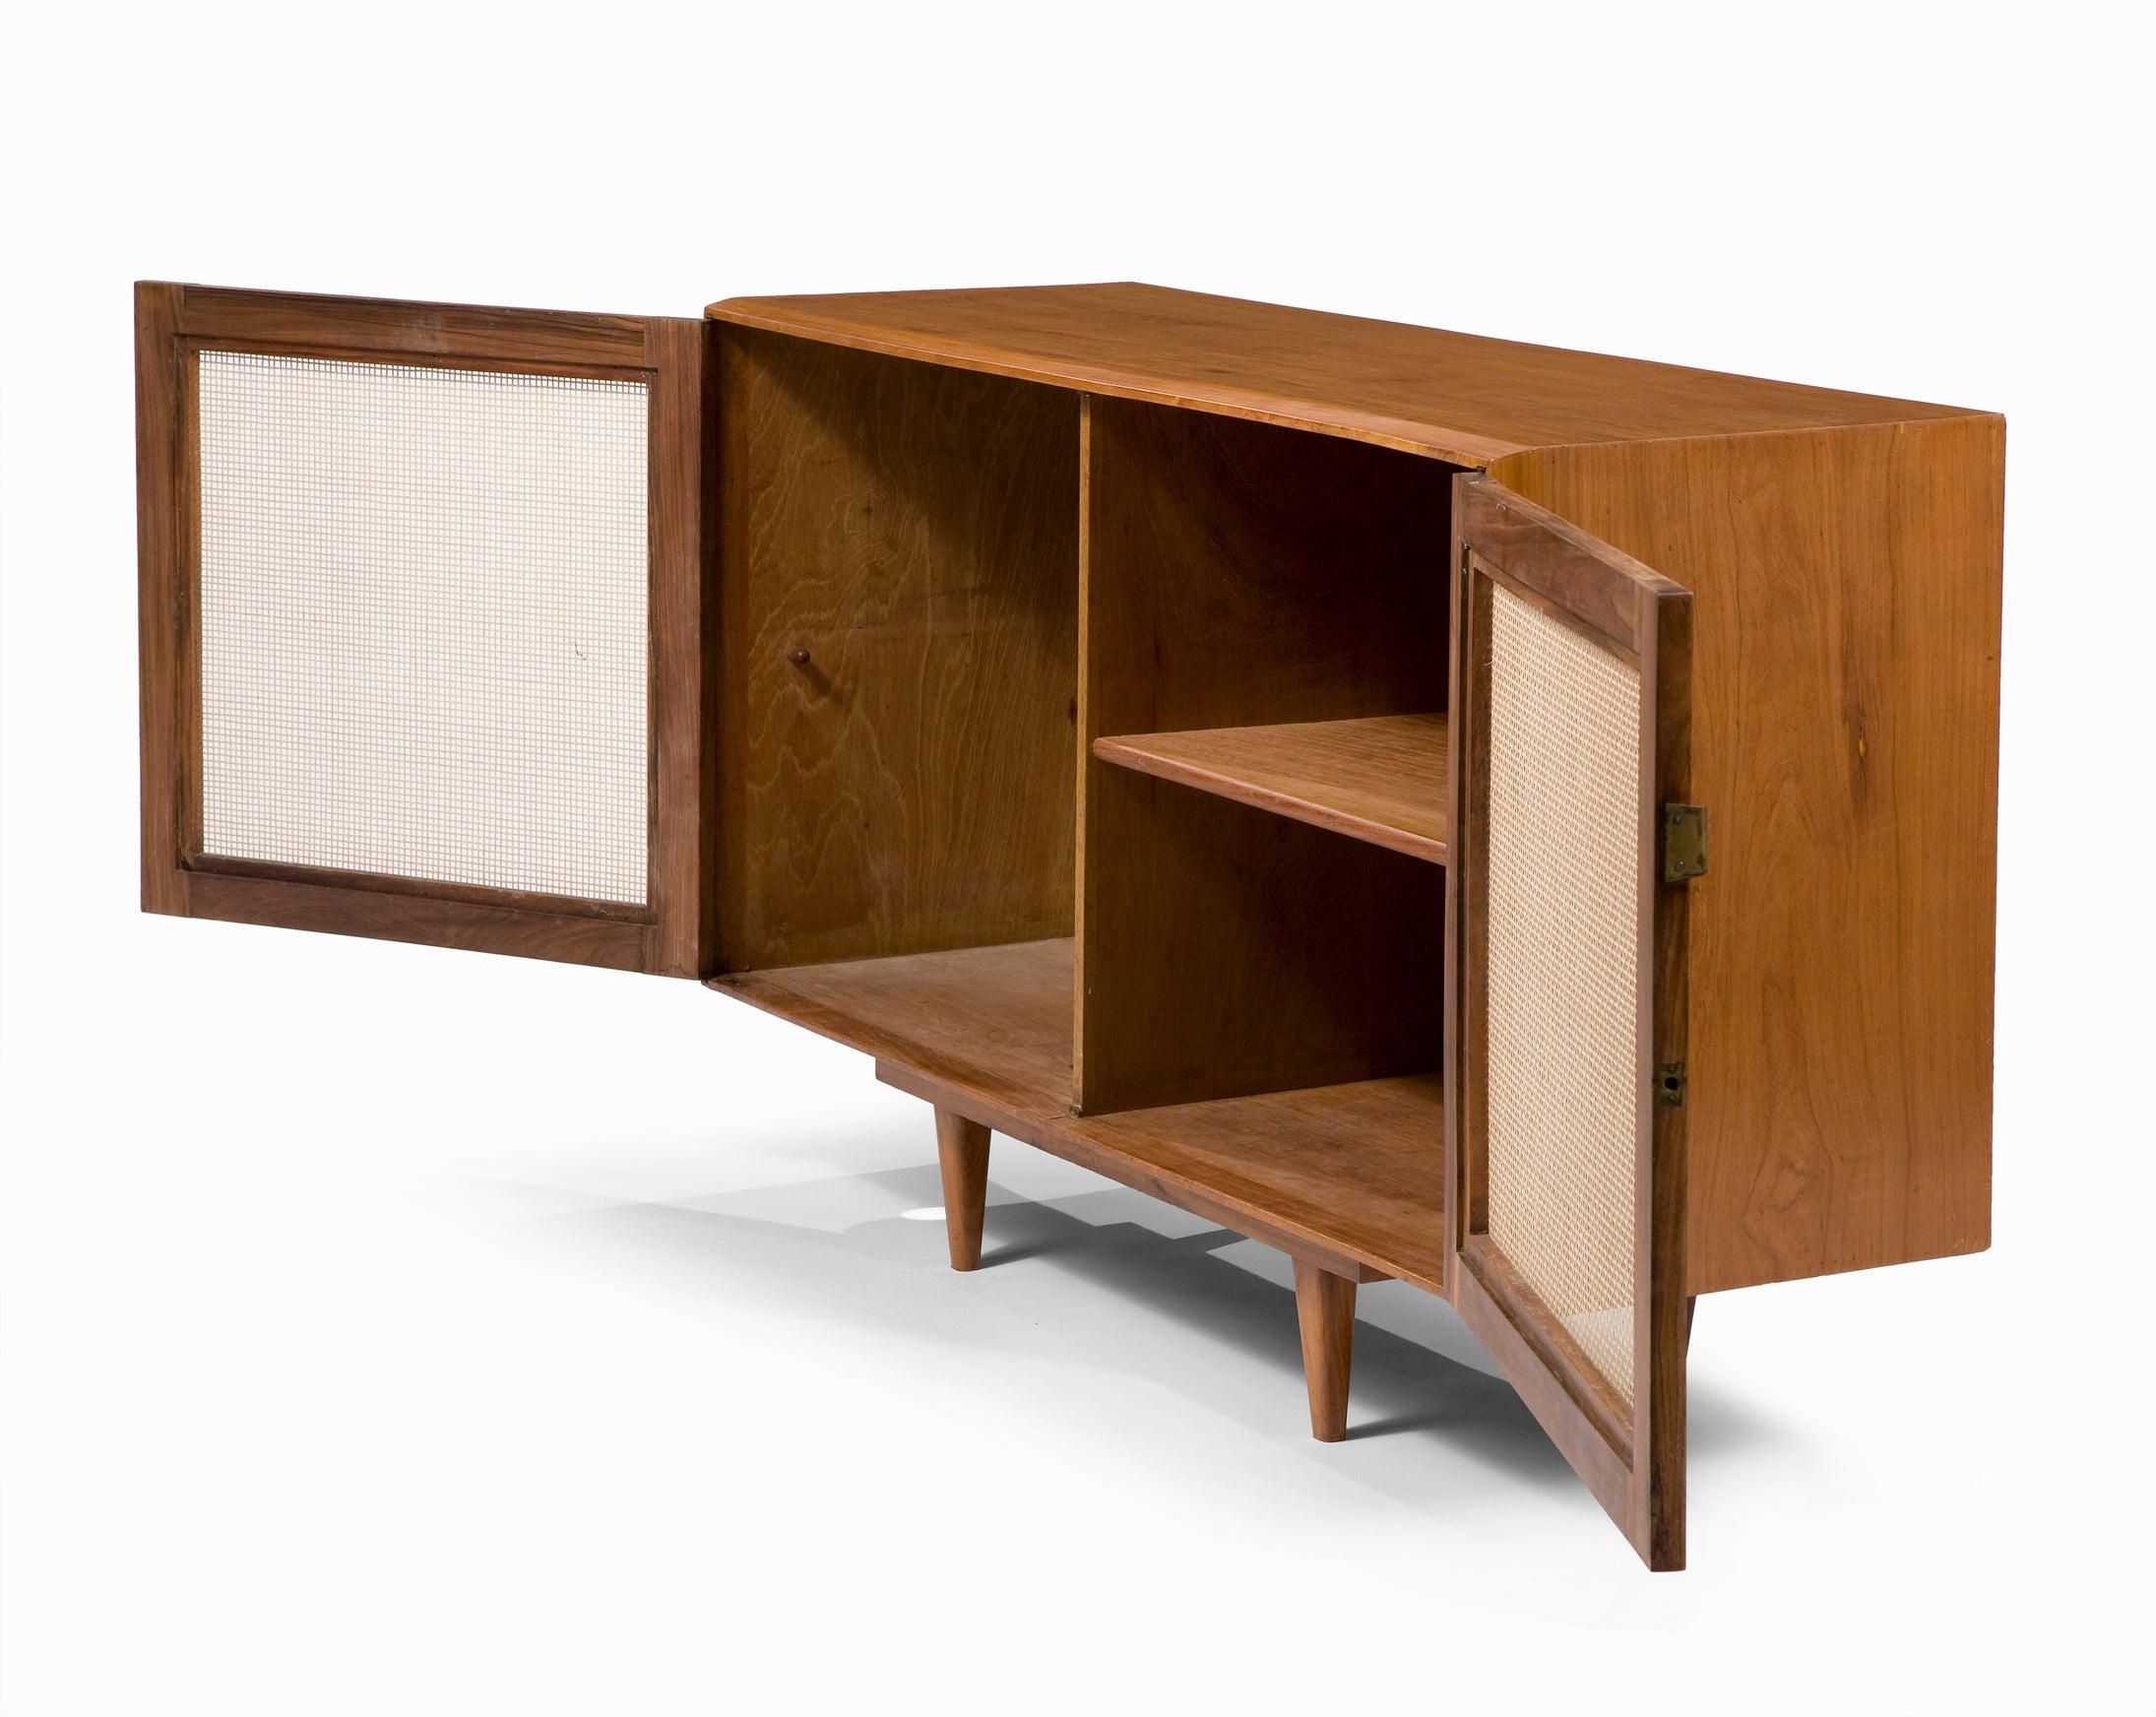 Brazilian Credenza in Caviona Wood with Cane Front by Martin Eisler for Forma, 1960